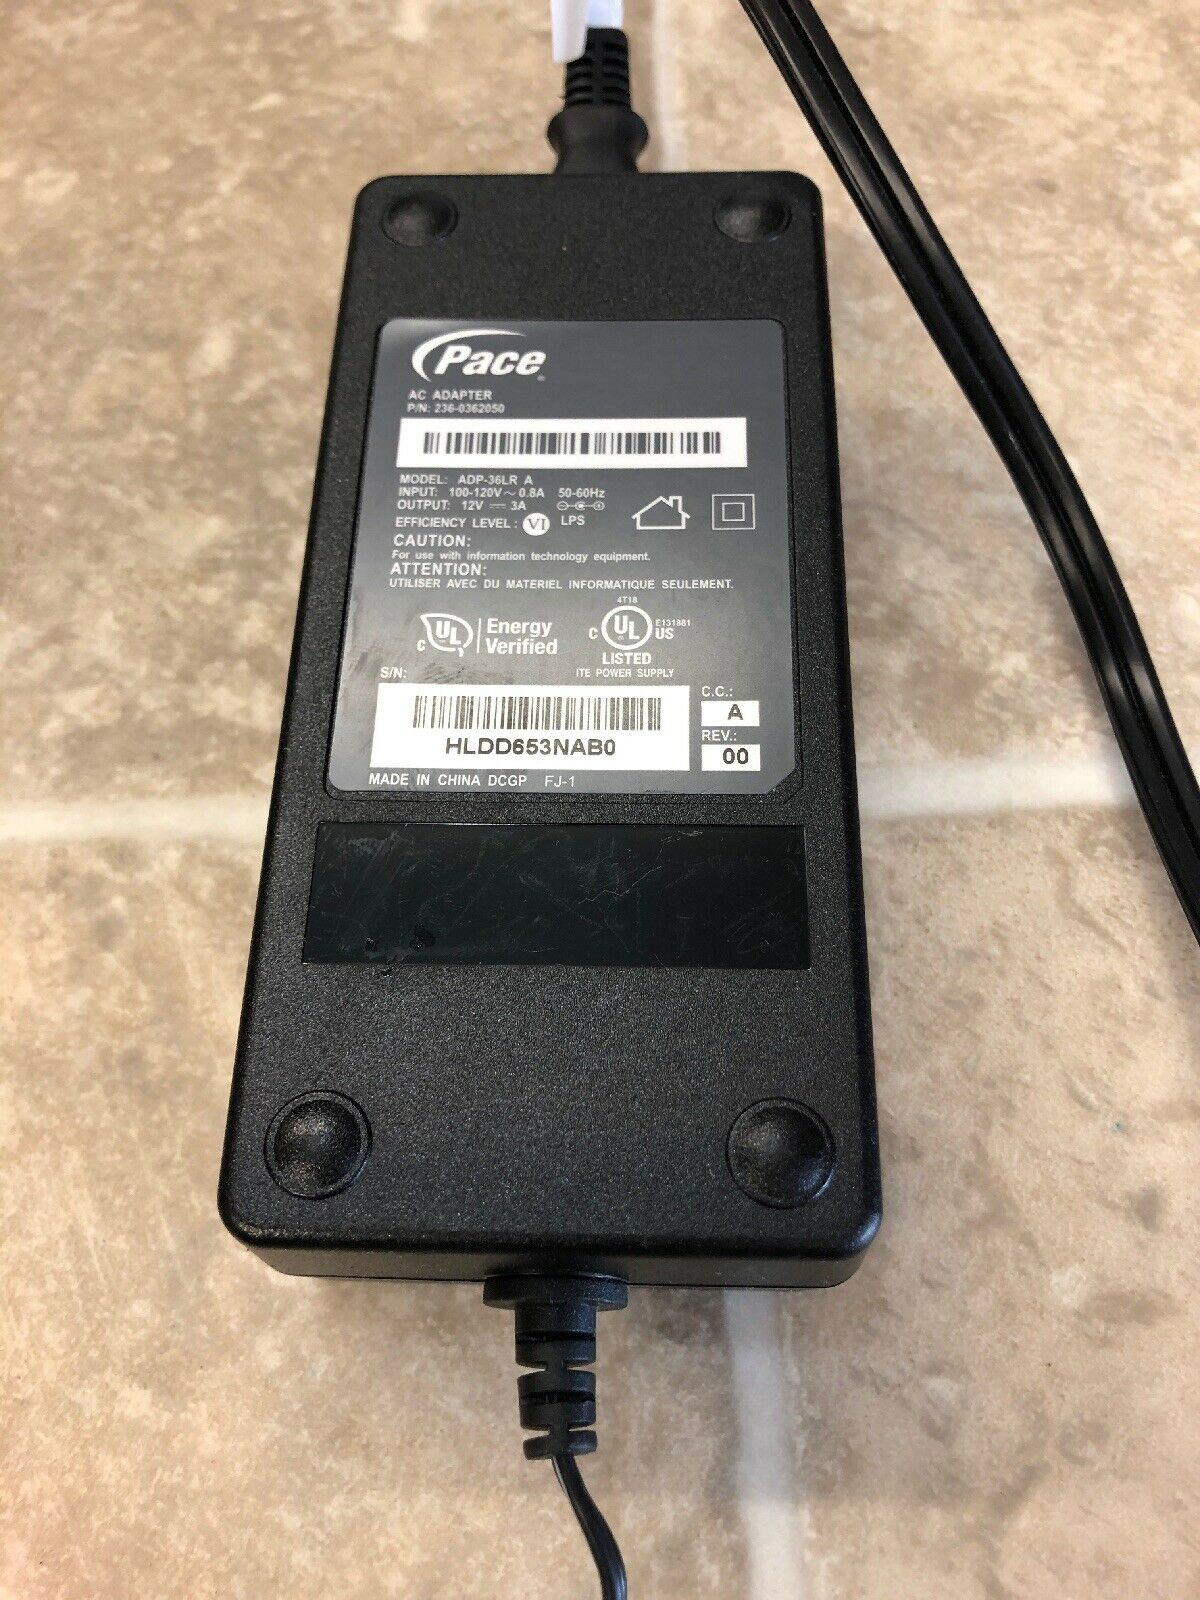 *Brand NEW* Pace 12V 3A AC DC Adapter ADP-36LR 236-0362050 POWER SUPPLY